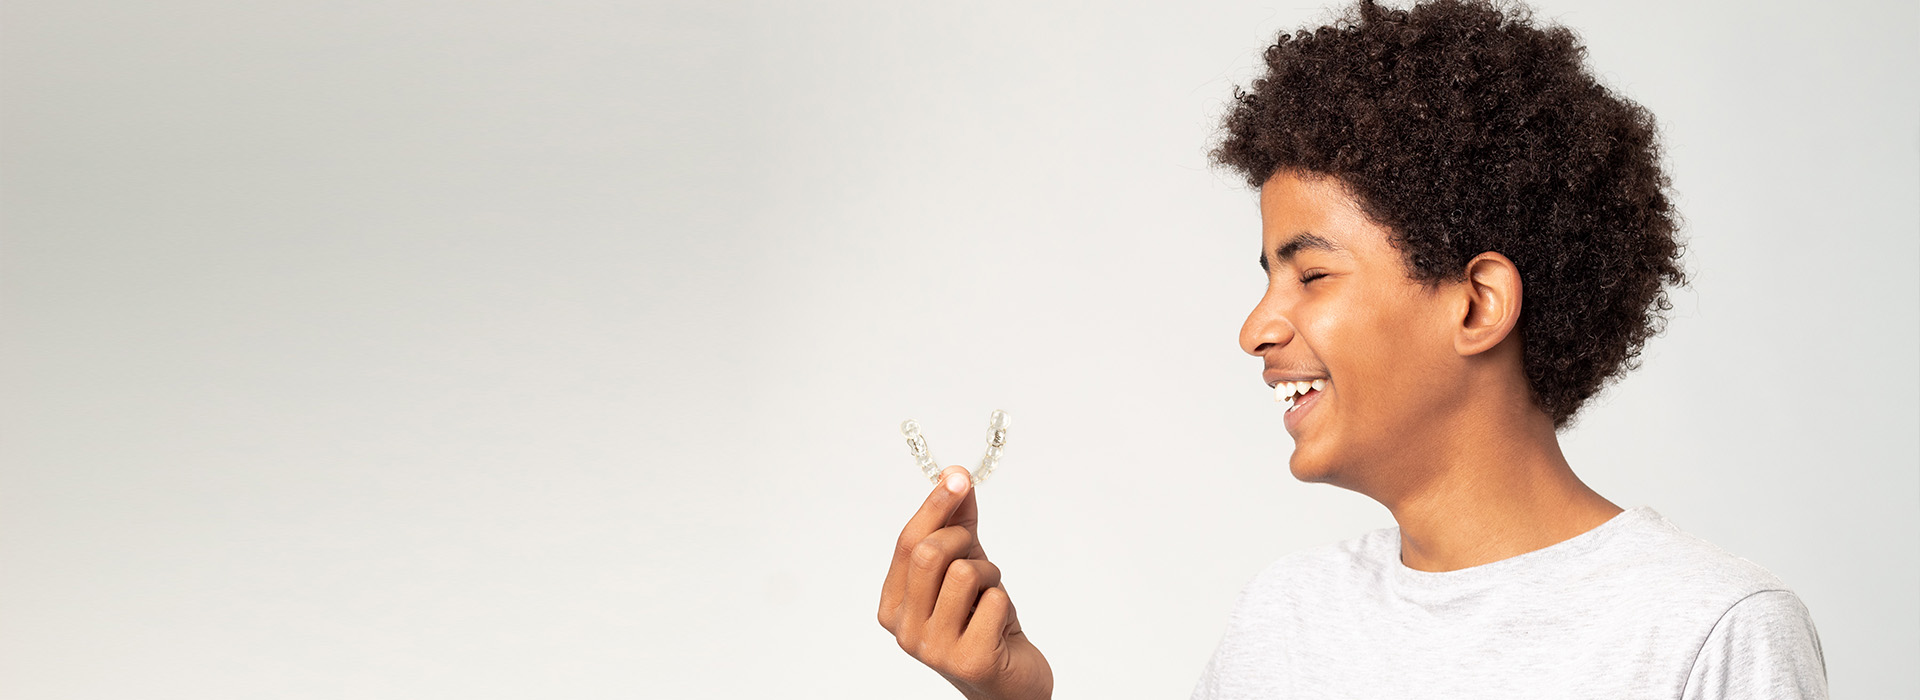 A young person with short hair, wearing a white shirt, is smiling and holding a small object that resembles a flower or star in their hand. The background is plain and light-colored, emphasizing the subject in the foreground.